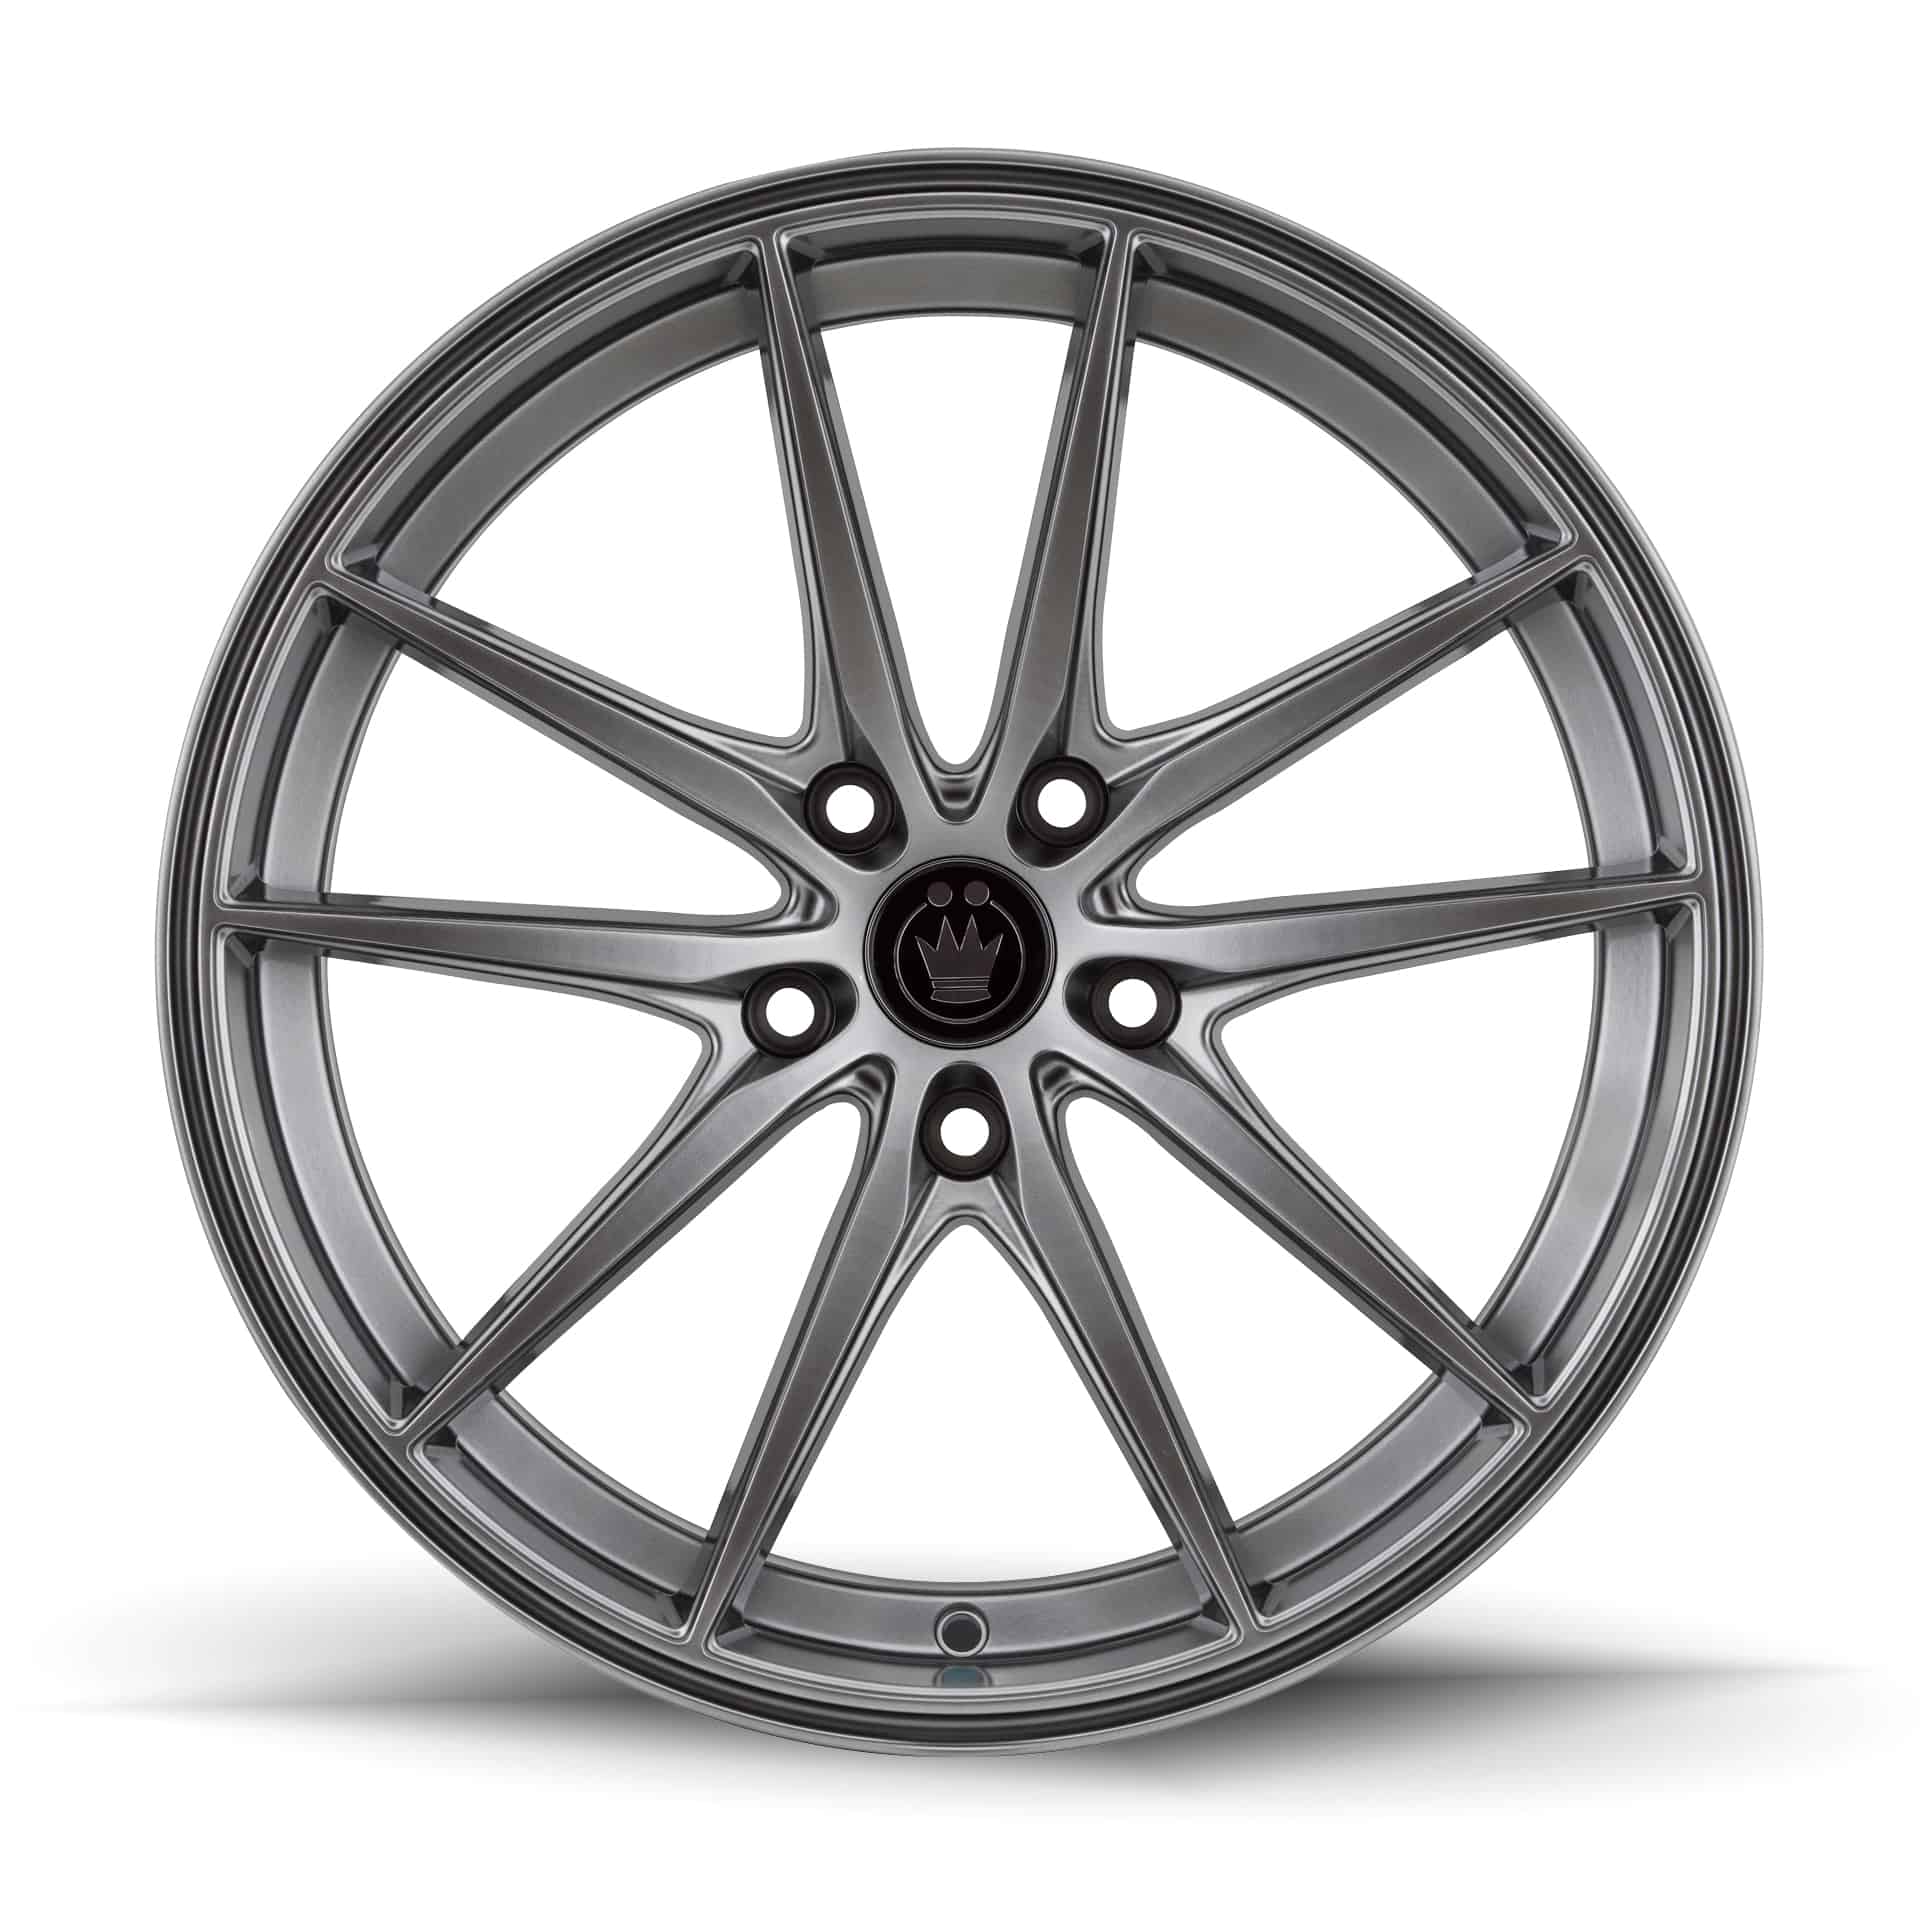 16 x 7.5 inches /5 x 114 mm, 45 mm Offset Konig OVERSTEER Gloss Black Wheel with Painted Finish 